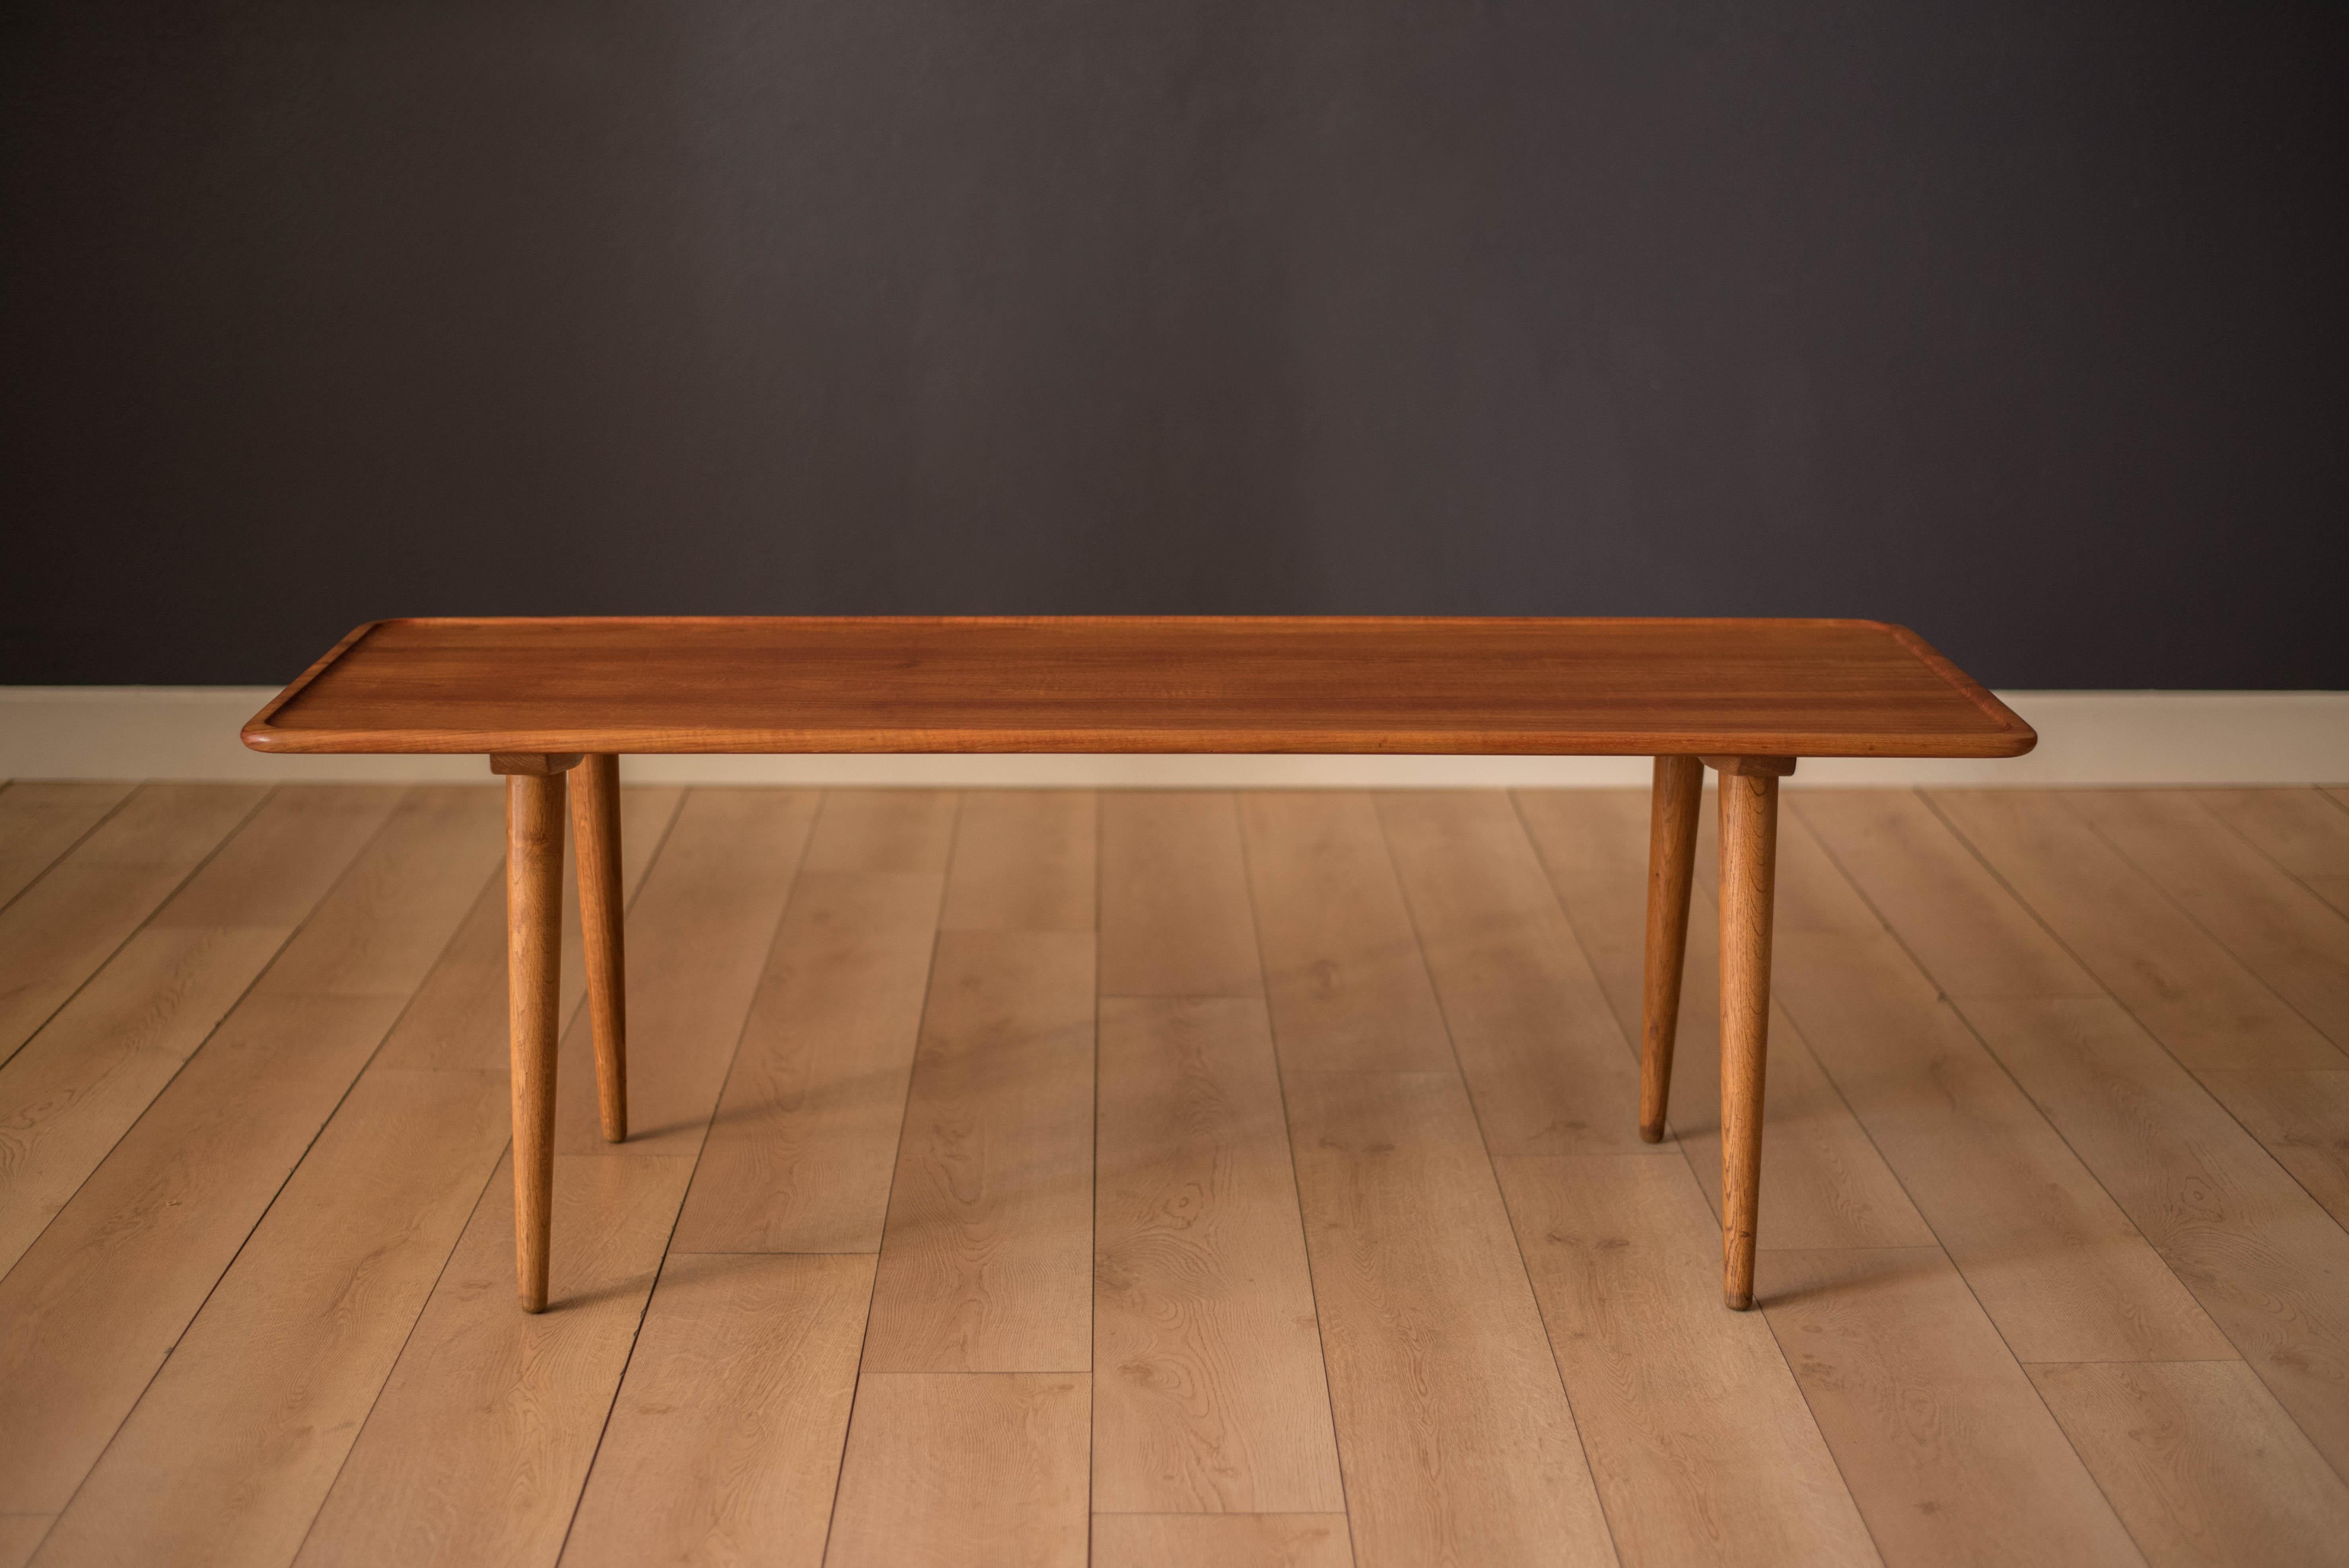 Mid-Century Modern original coffee table designed by Hans Wegner for Andreas Tuck model AT-11. This solid planked teak tabletop displays a sleek Minimalist design with raised rounded edges. Supported by four sturdy oak legs that splay at an angle.